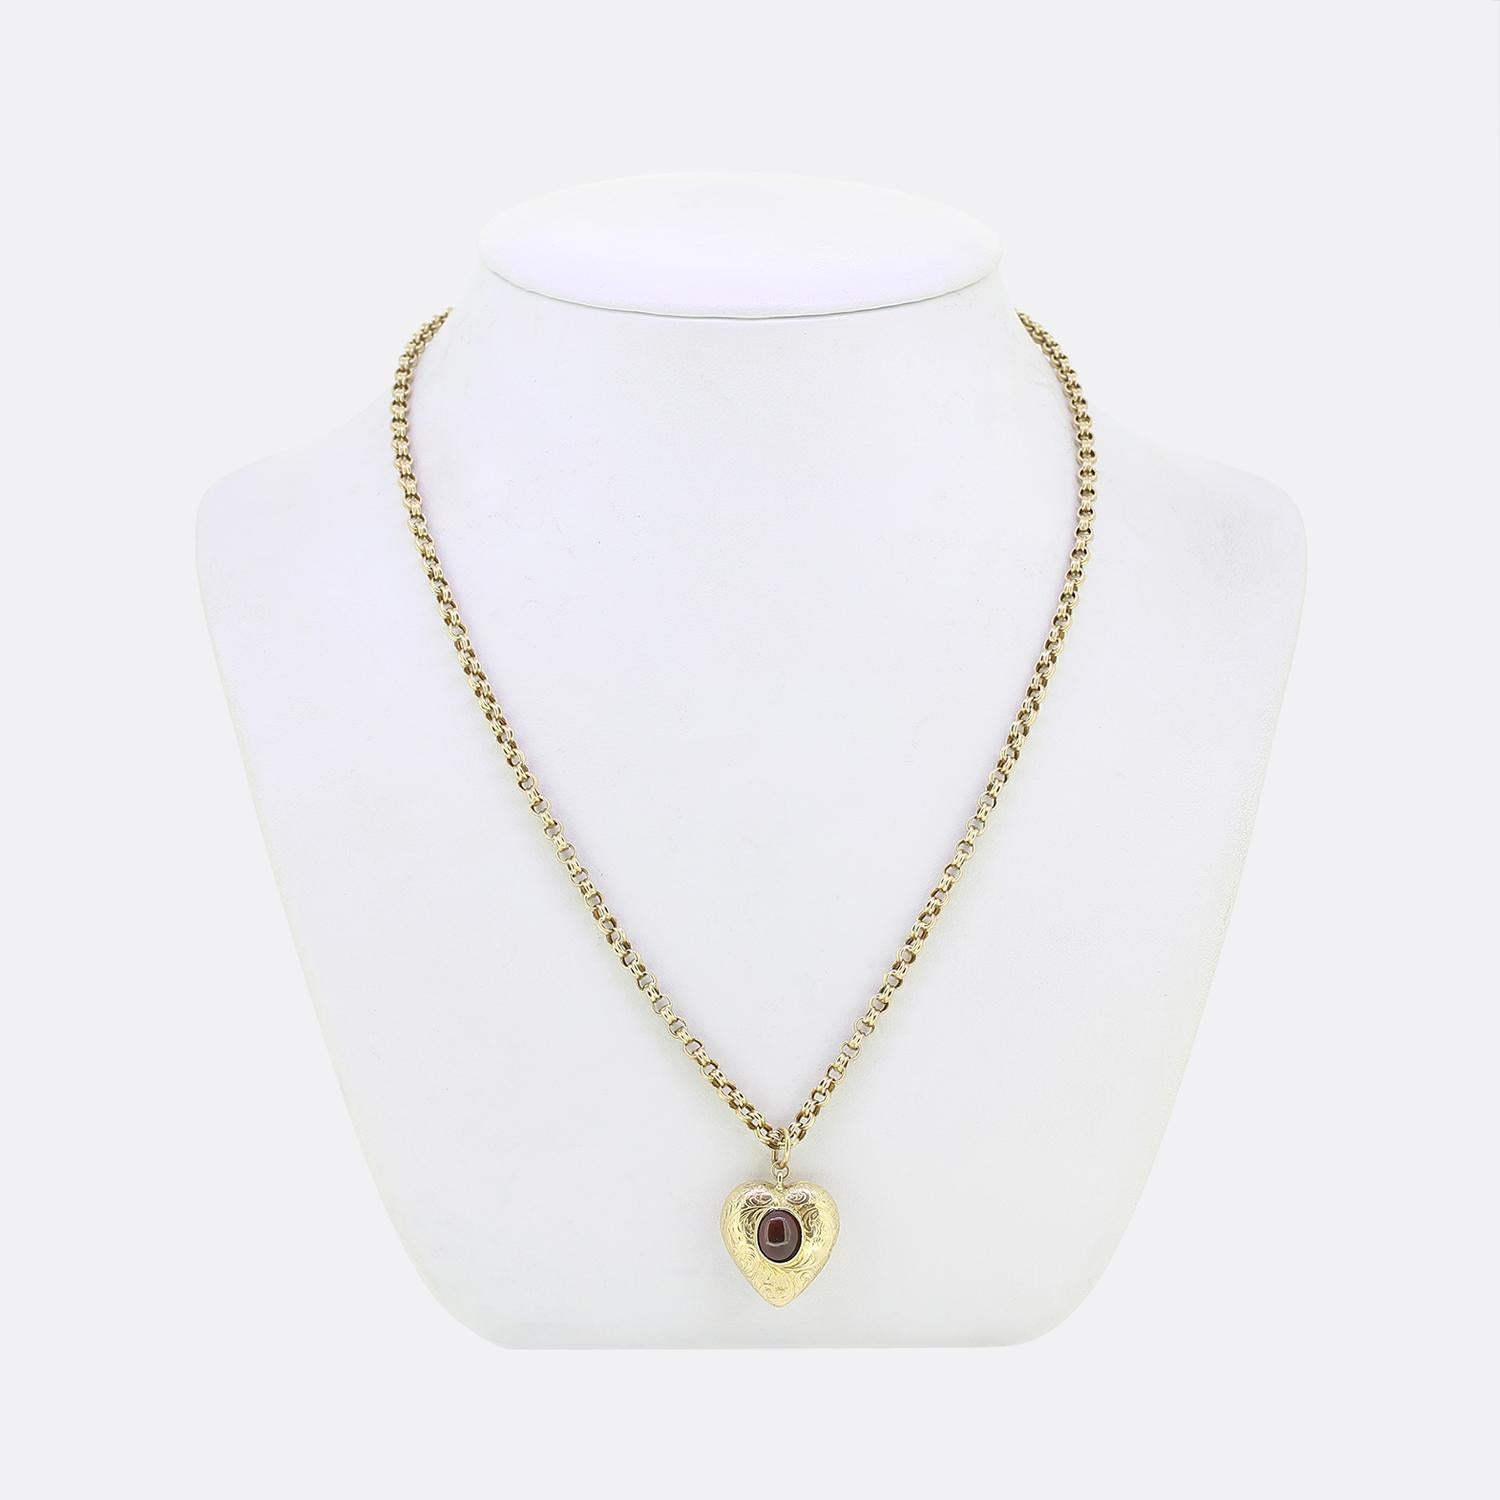 Here we have a delightful ruby pendant necklace. This antique pendant has been crafted from 9ct yellow gold into the the shape of a love heart. This hollow motif has then been meticulously engraved with a fauna and flora design whilst being set at